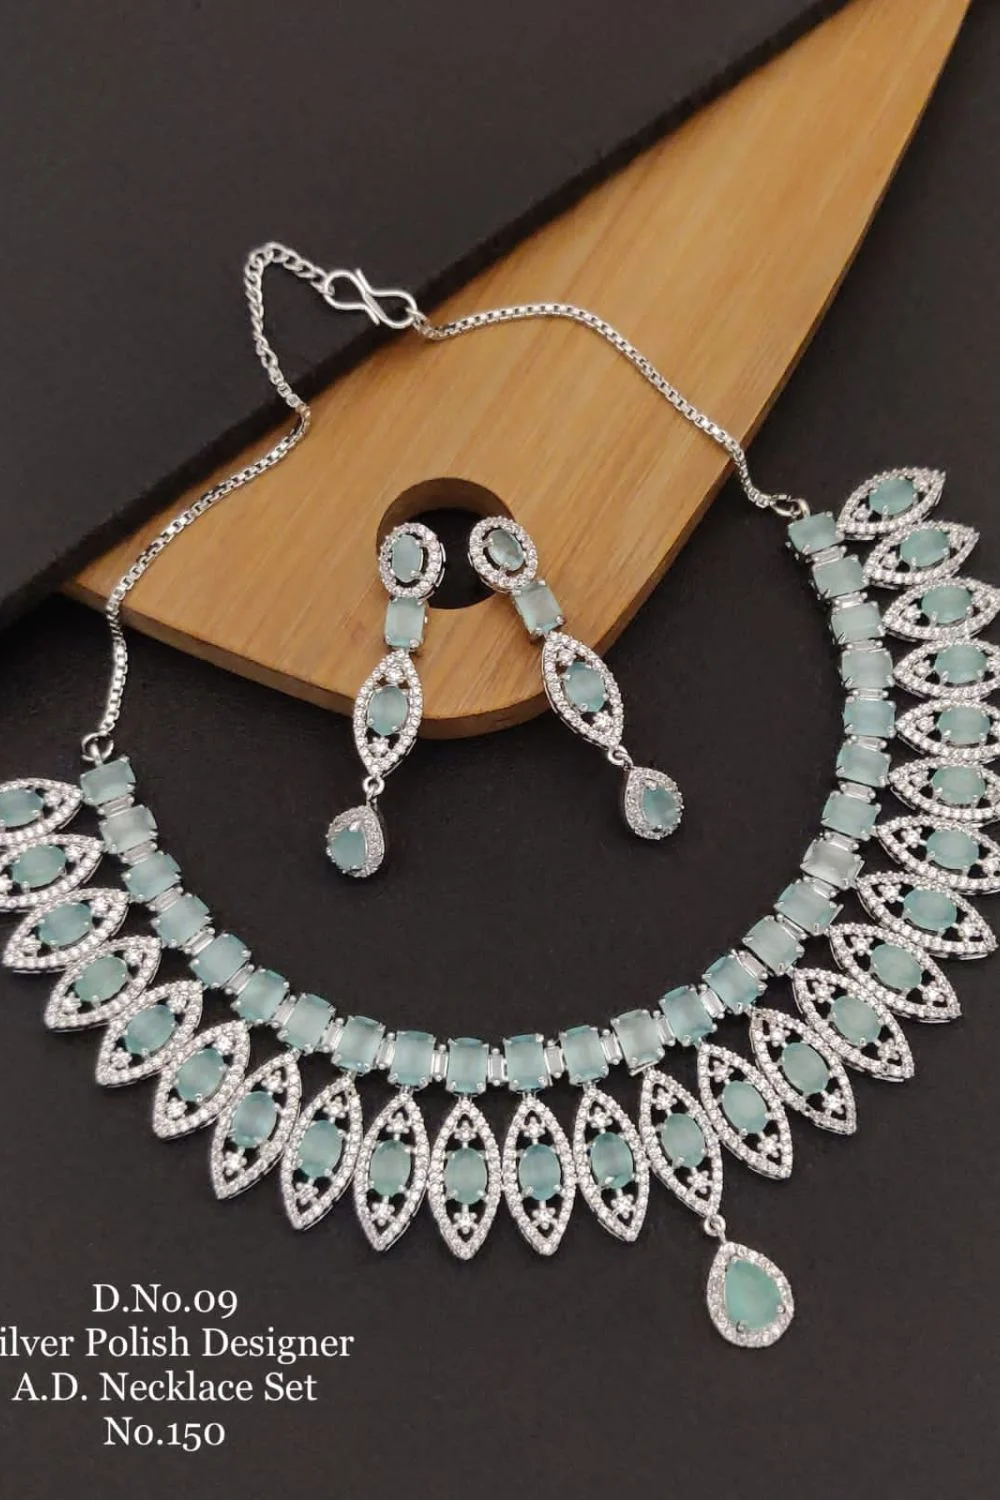 Beautiful Silver Polished AD Necklace